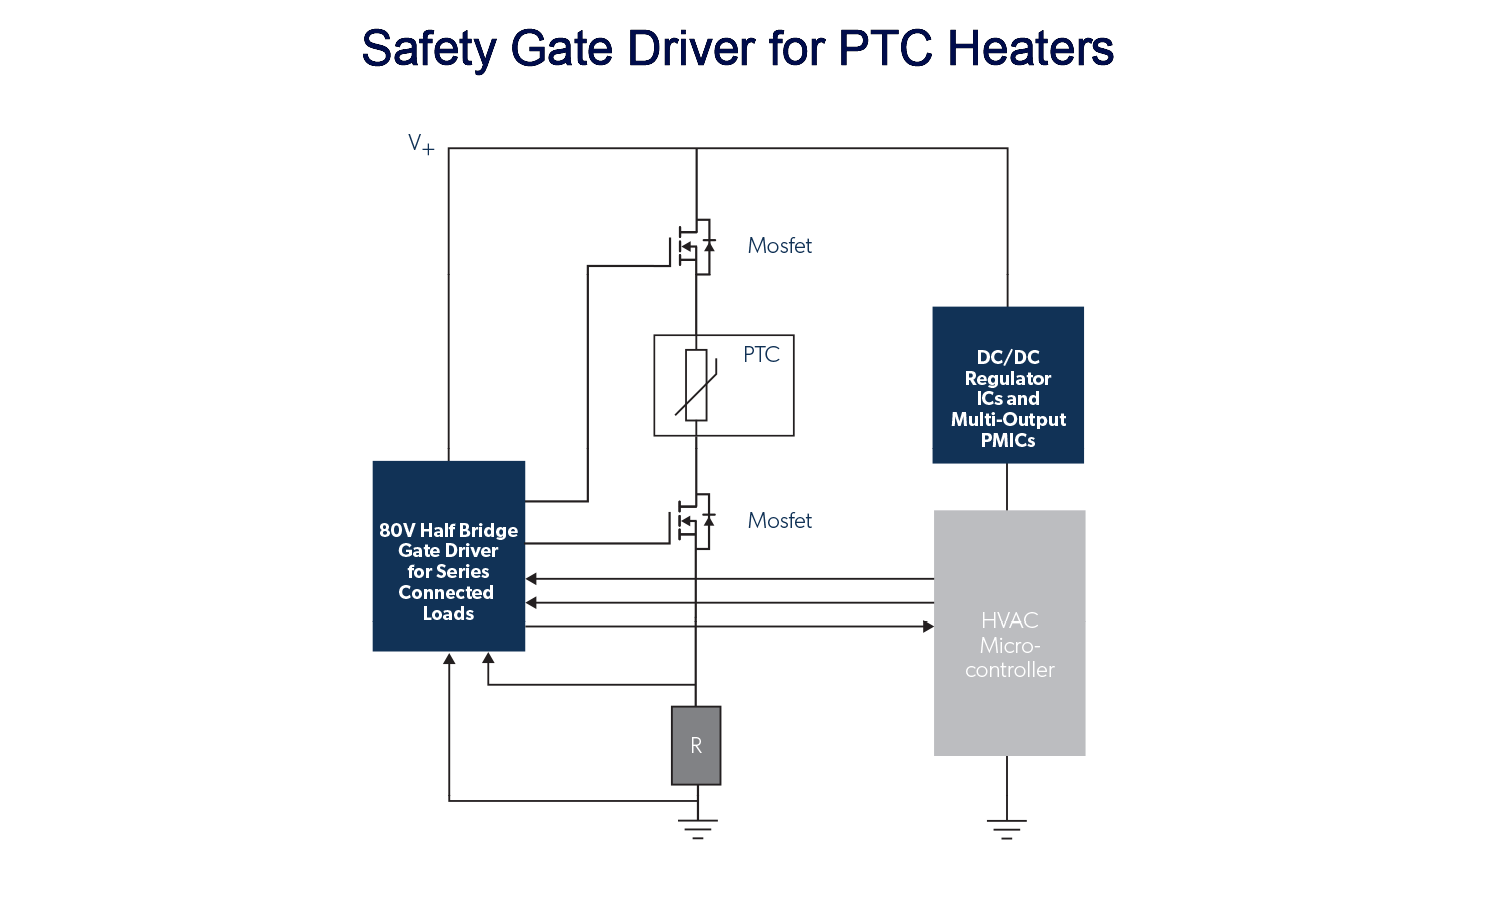 Safety Gate Drivers for PTC Heaters